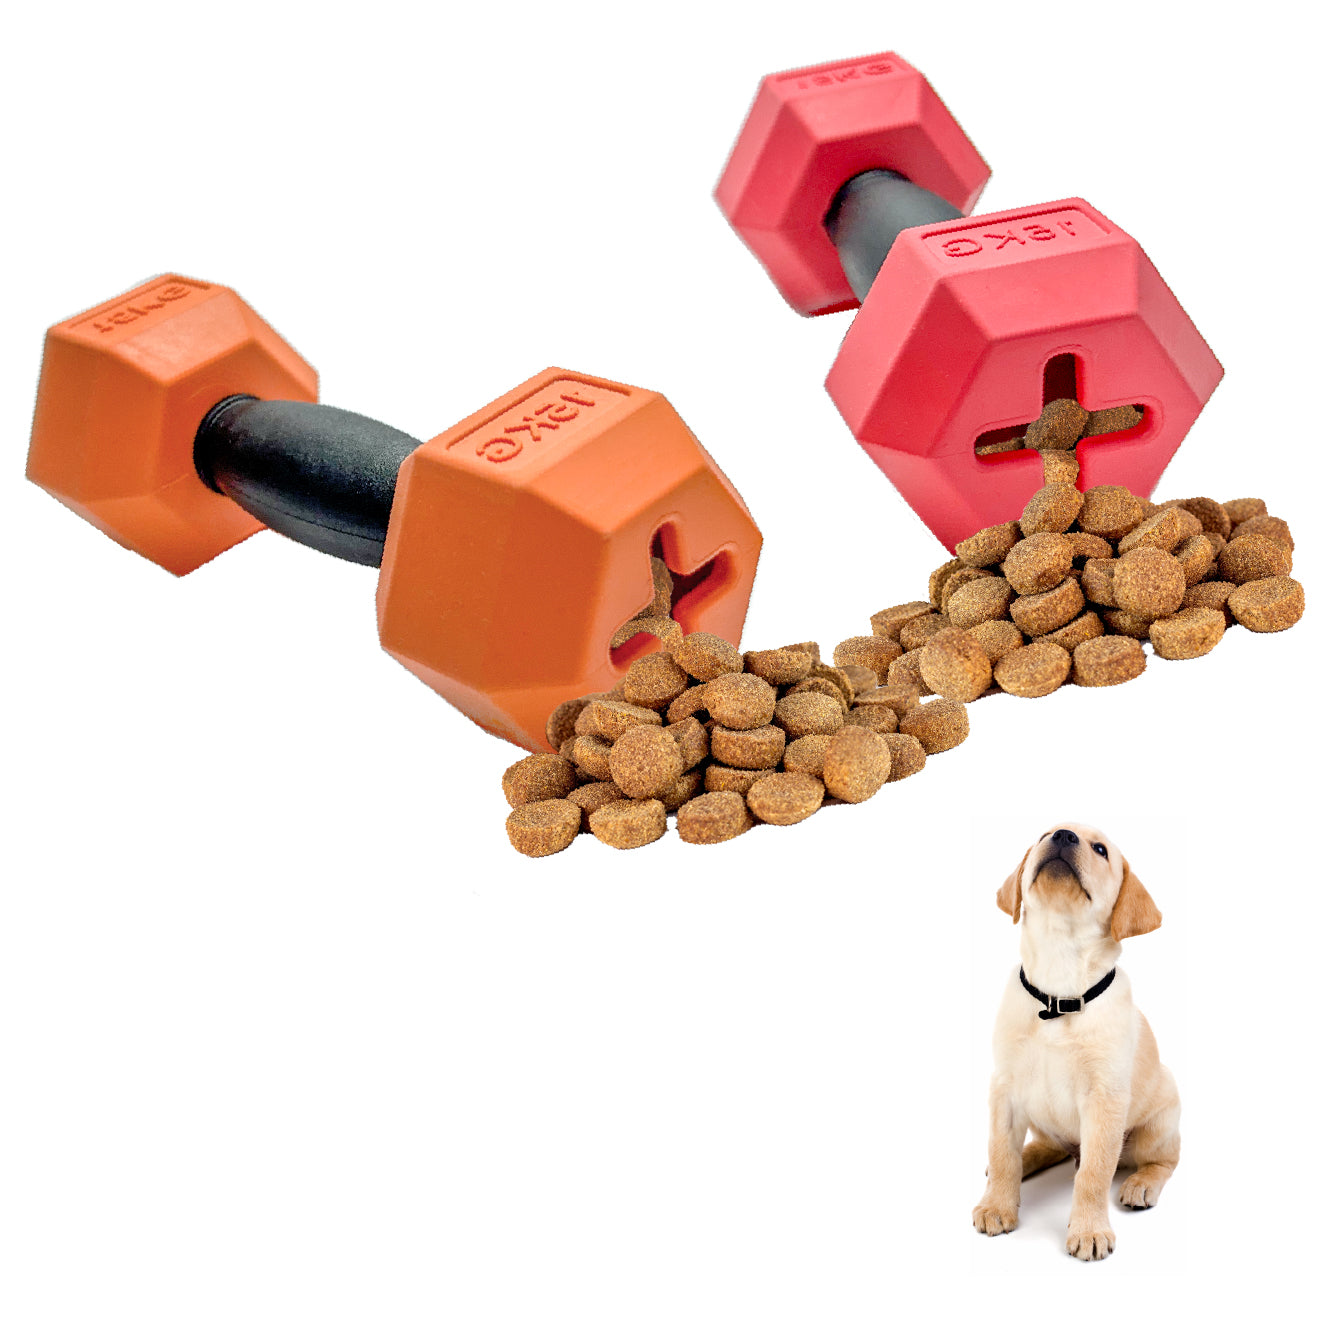 ALL FOR PAWS Dog Chew Toy,Dumbell Puppy Teething Chew Toys